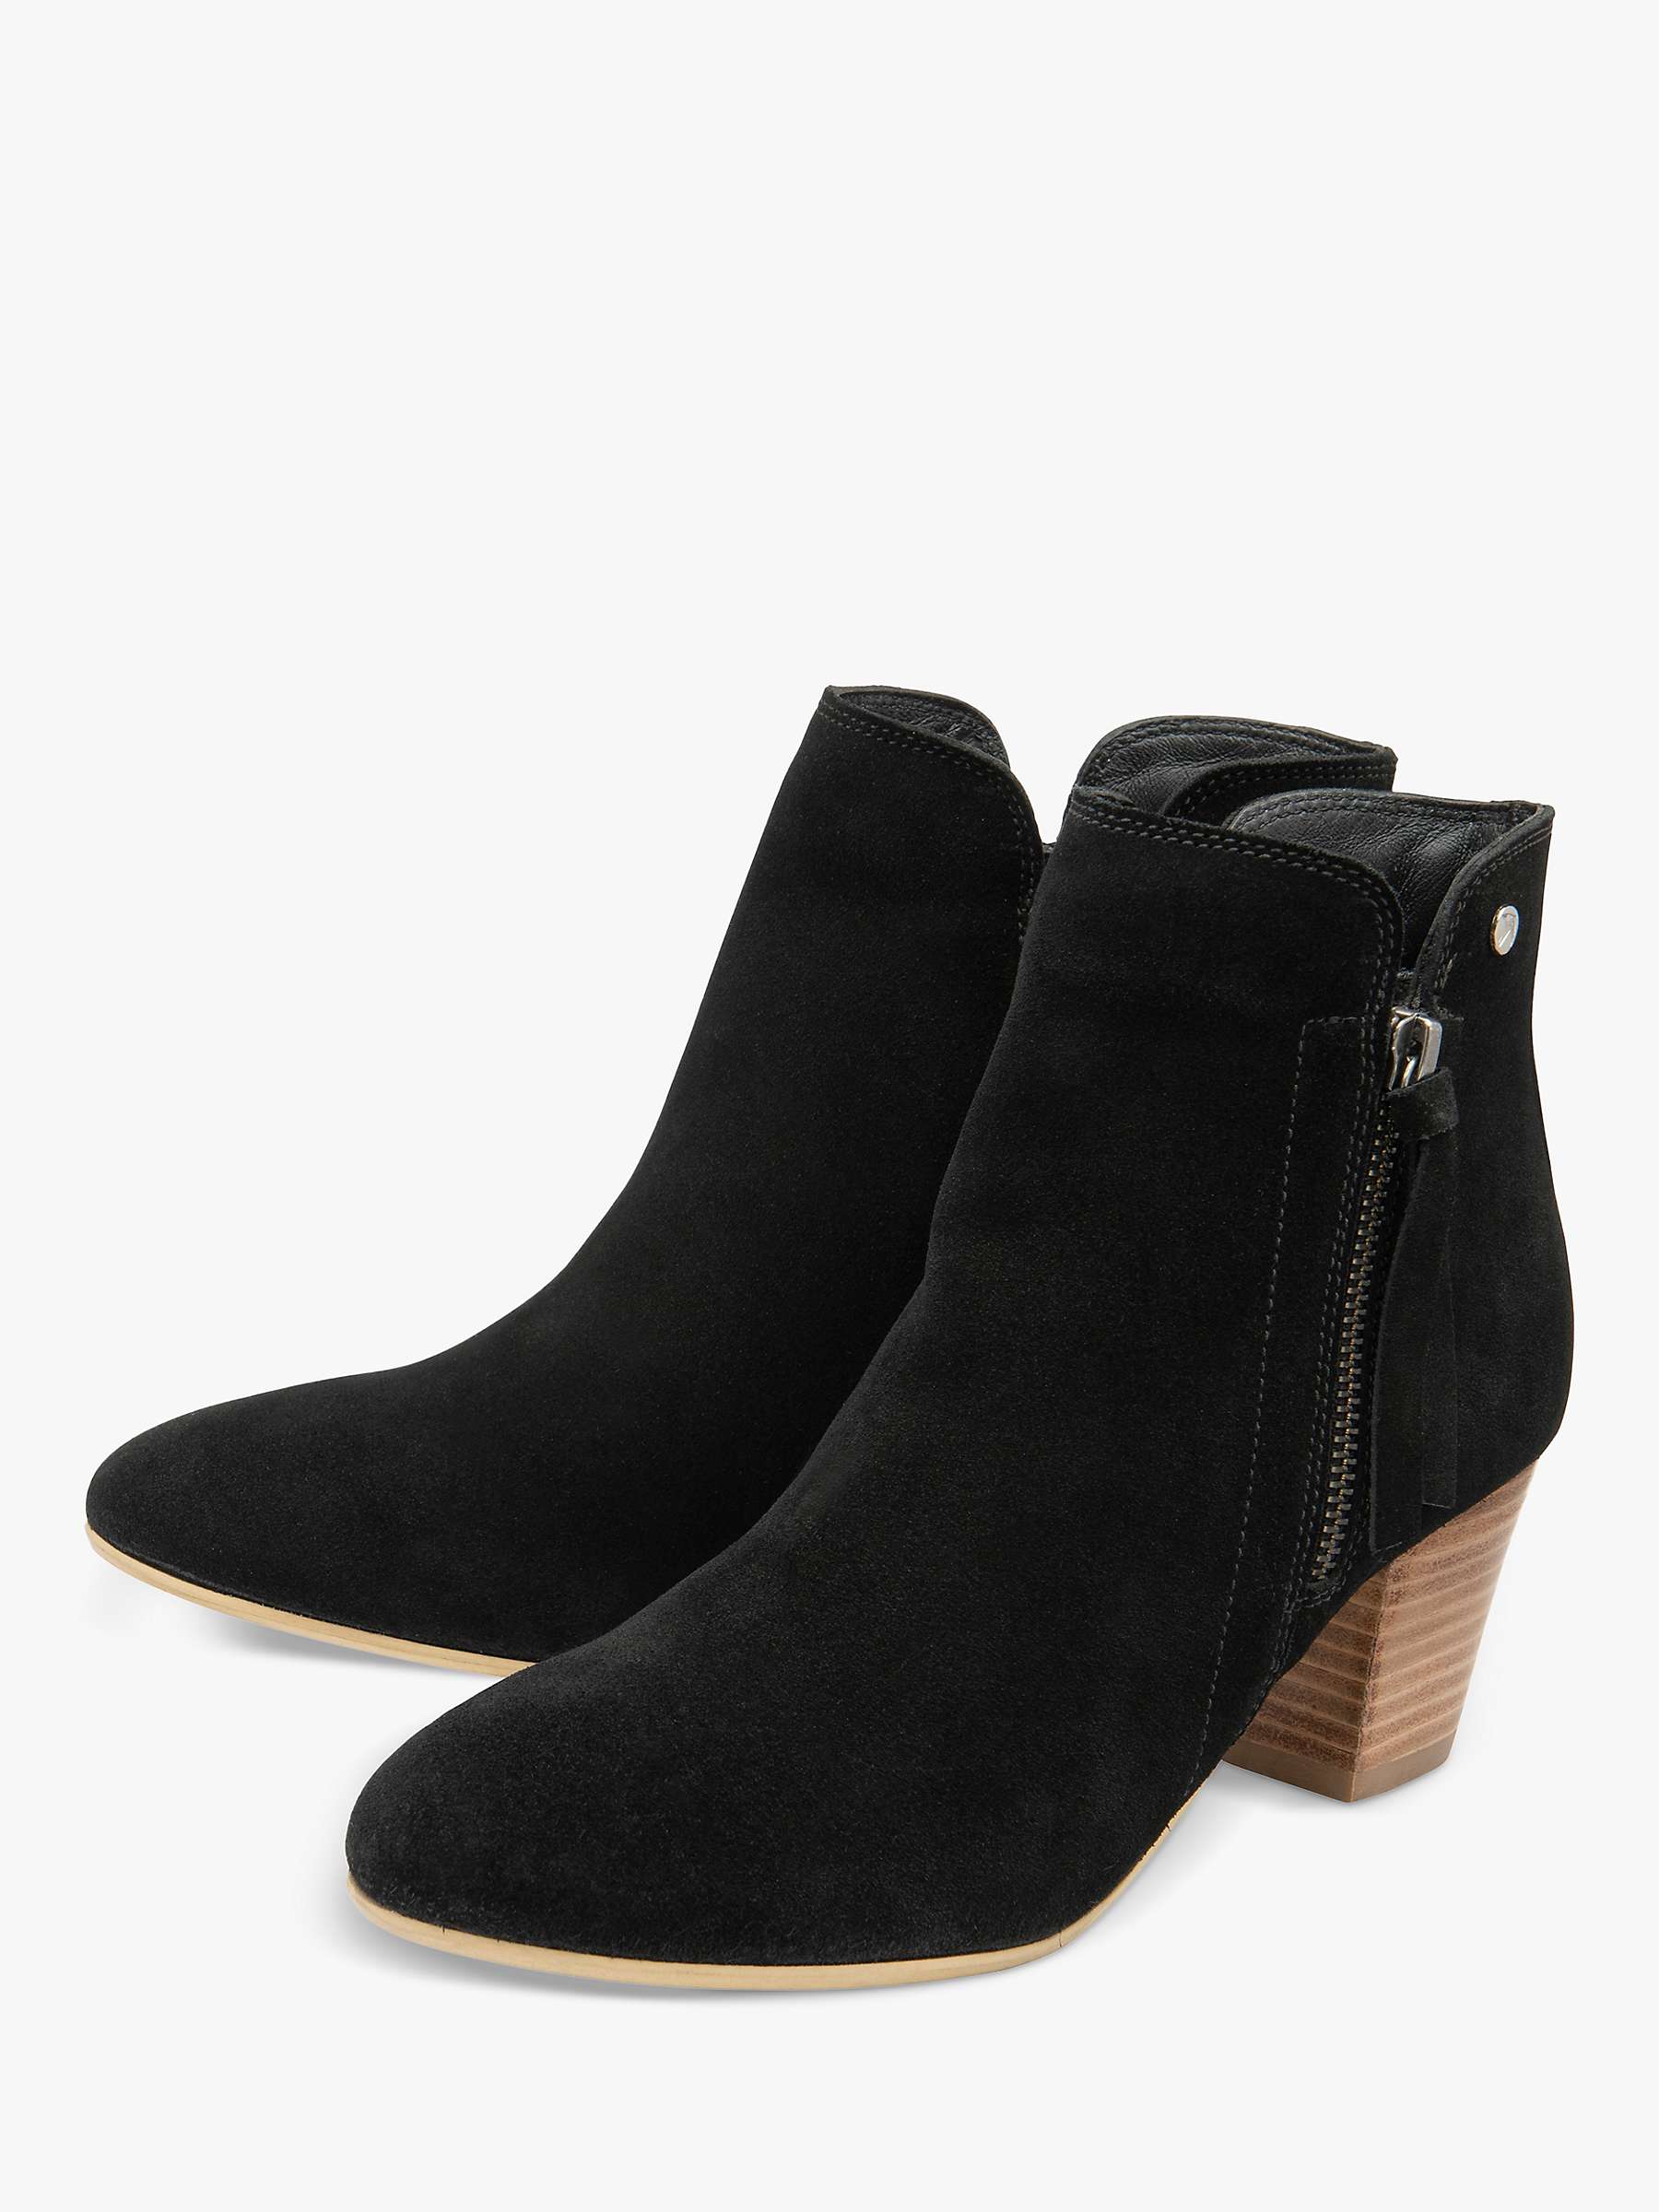 Buy Ravel Tulli Suede Ankle Boots Online at johnlewis.com